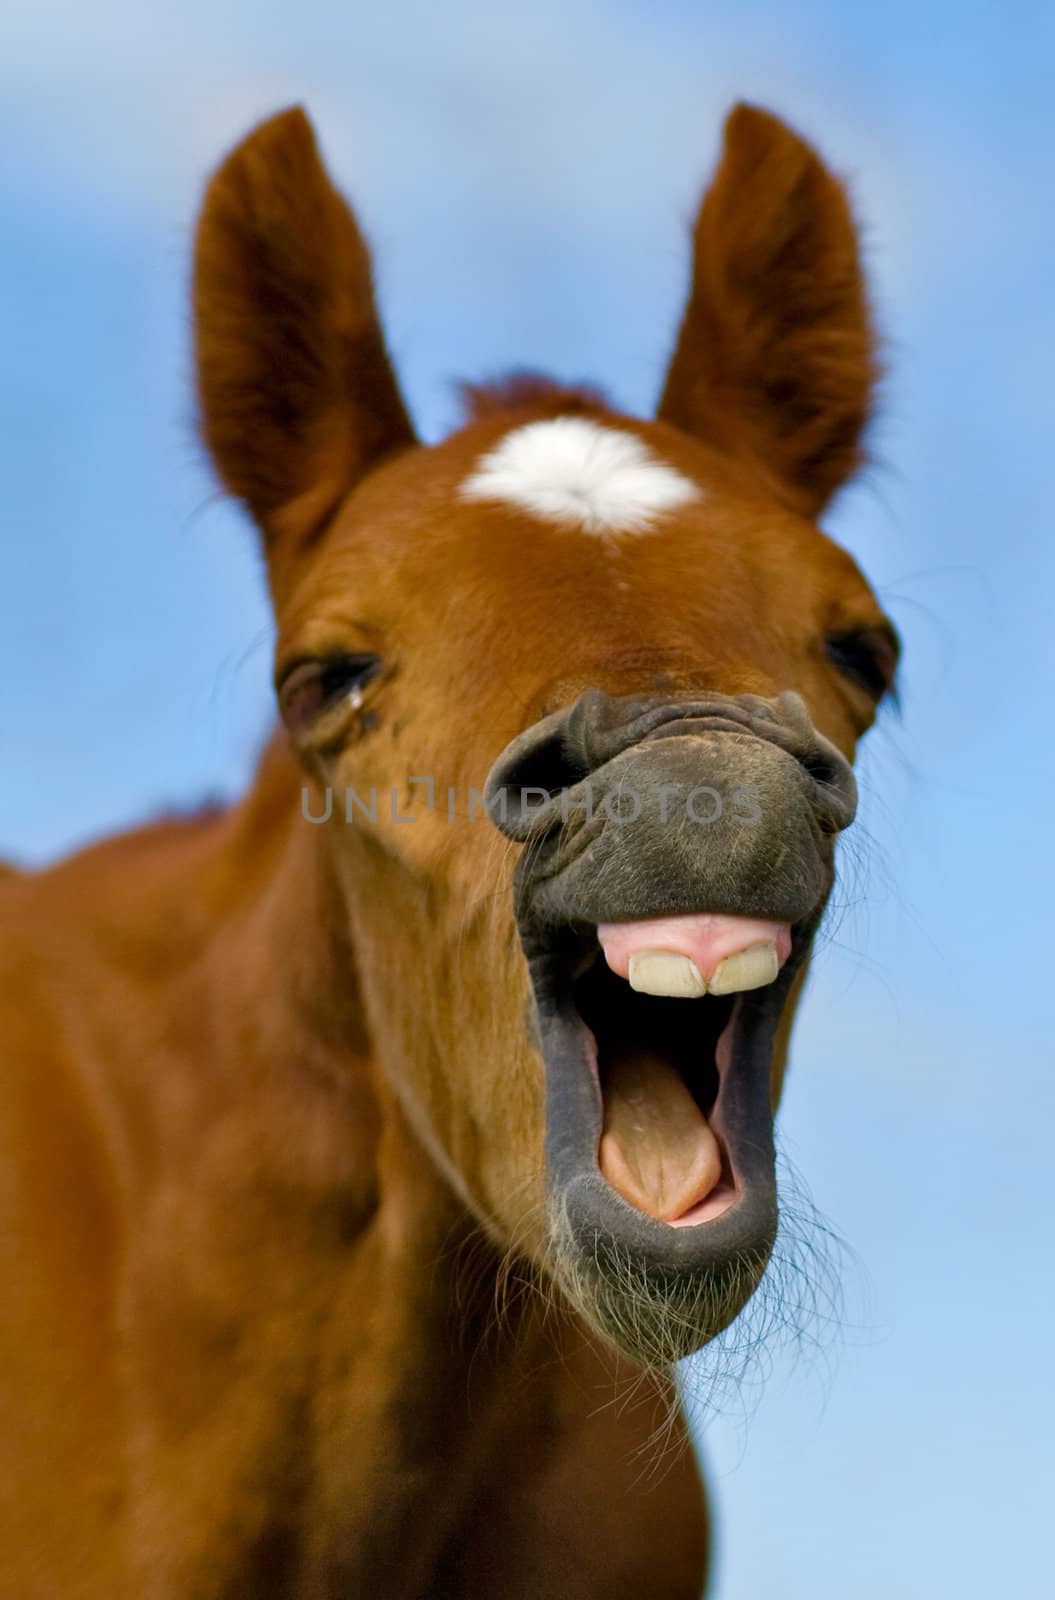 Horse with mouth open looking like. It with a very funny expression on his face as if he is laughing